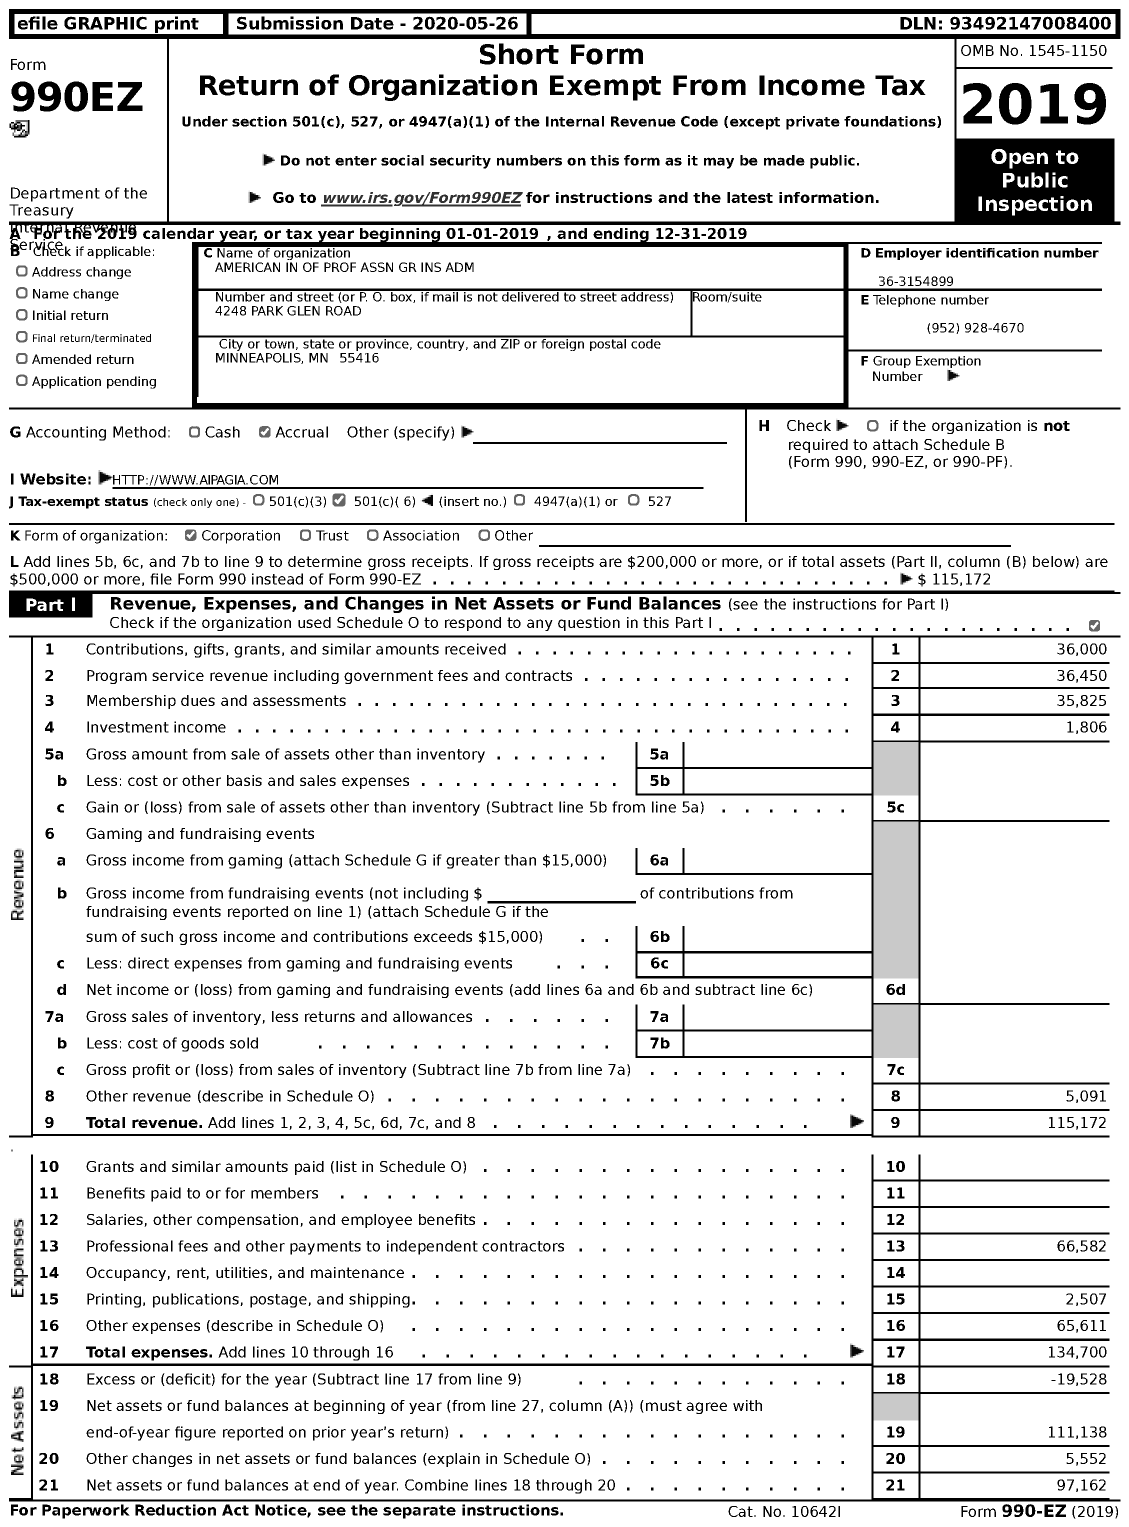 Image of first page of 2019 Form 990EZ for American in of Prof Association GR Ins Adm